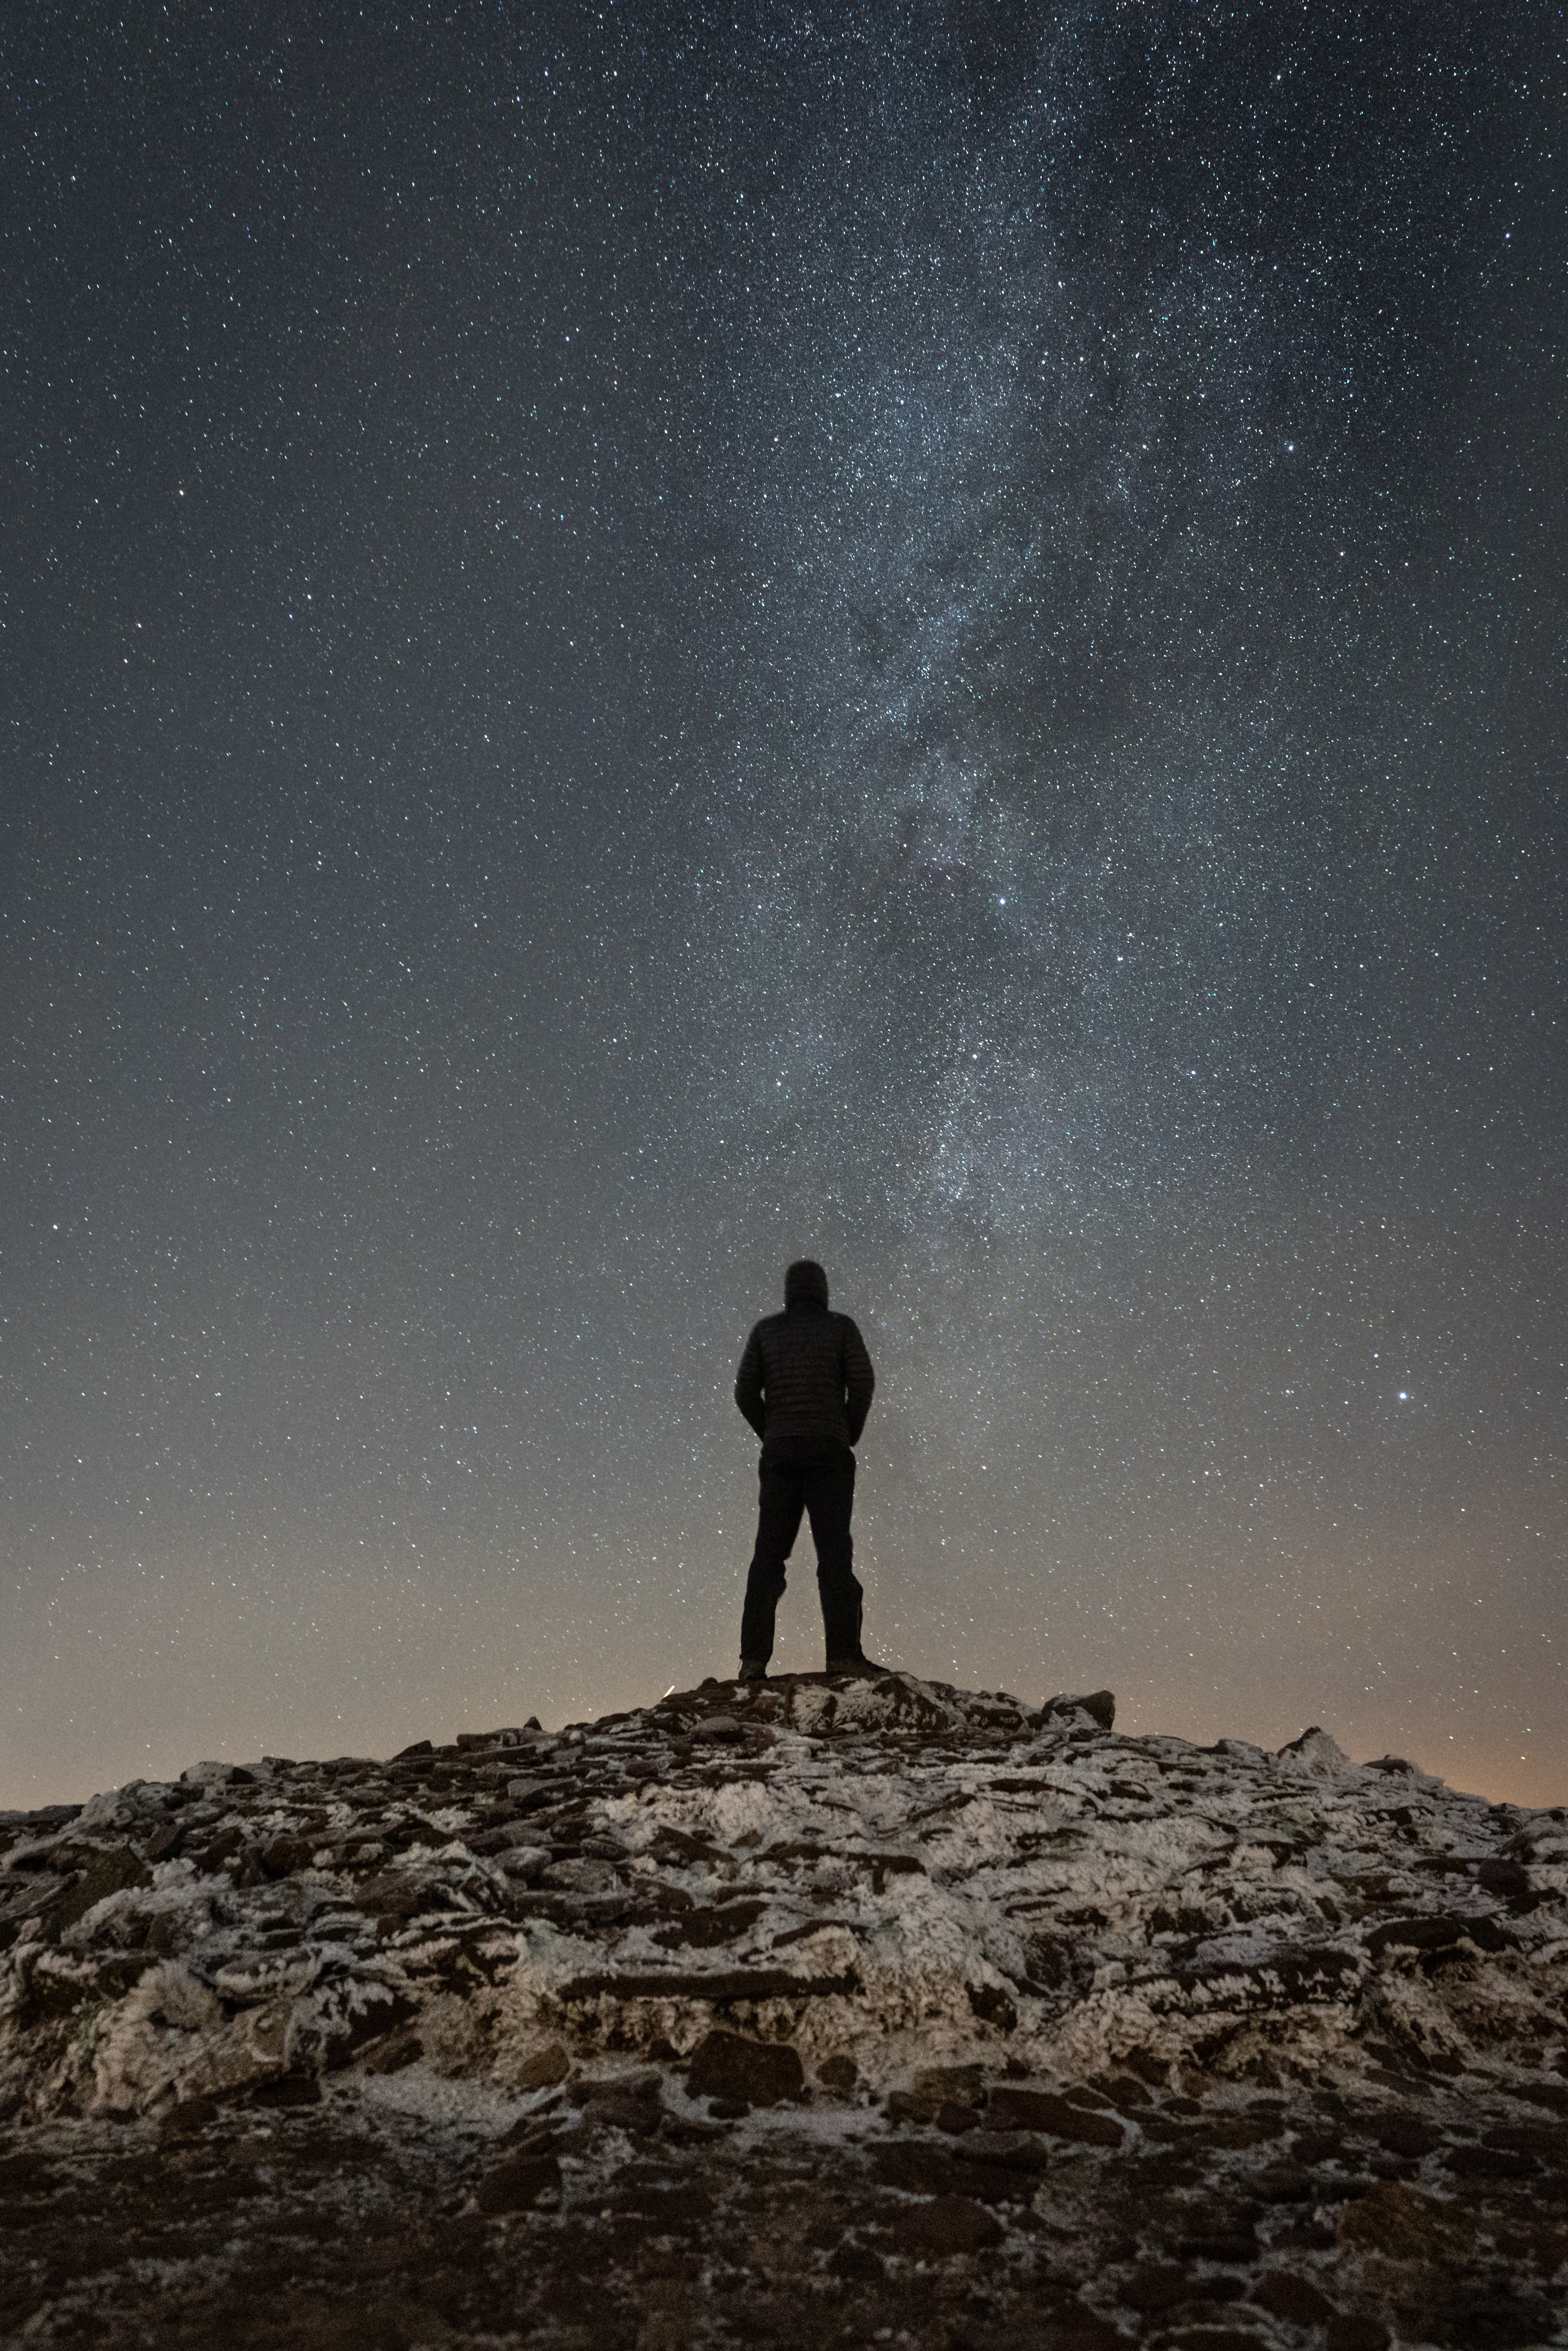 miscellanea, vertex, top, silhouette, miscellaneous, starry sky, human, person, hill High Definition image